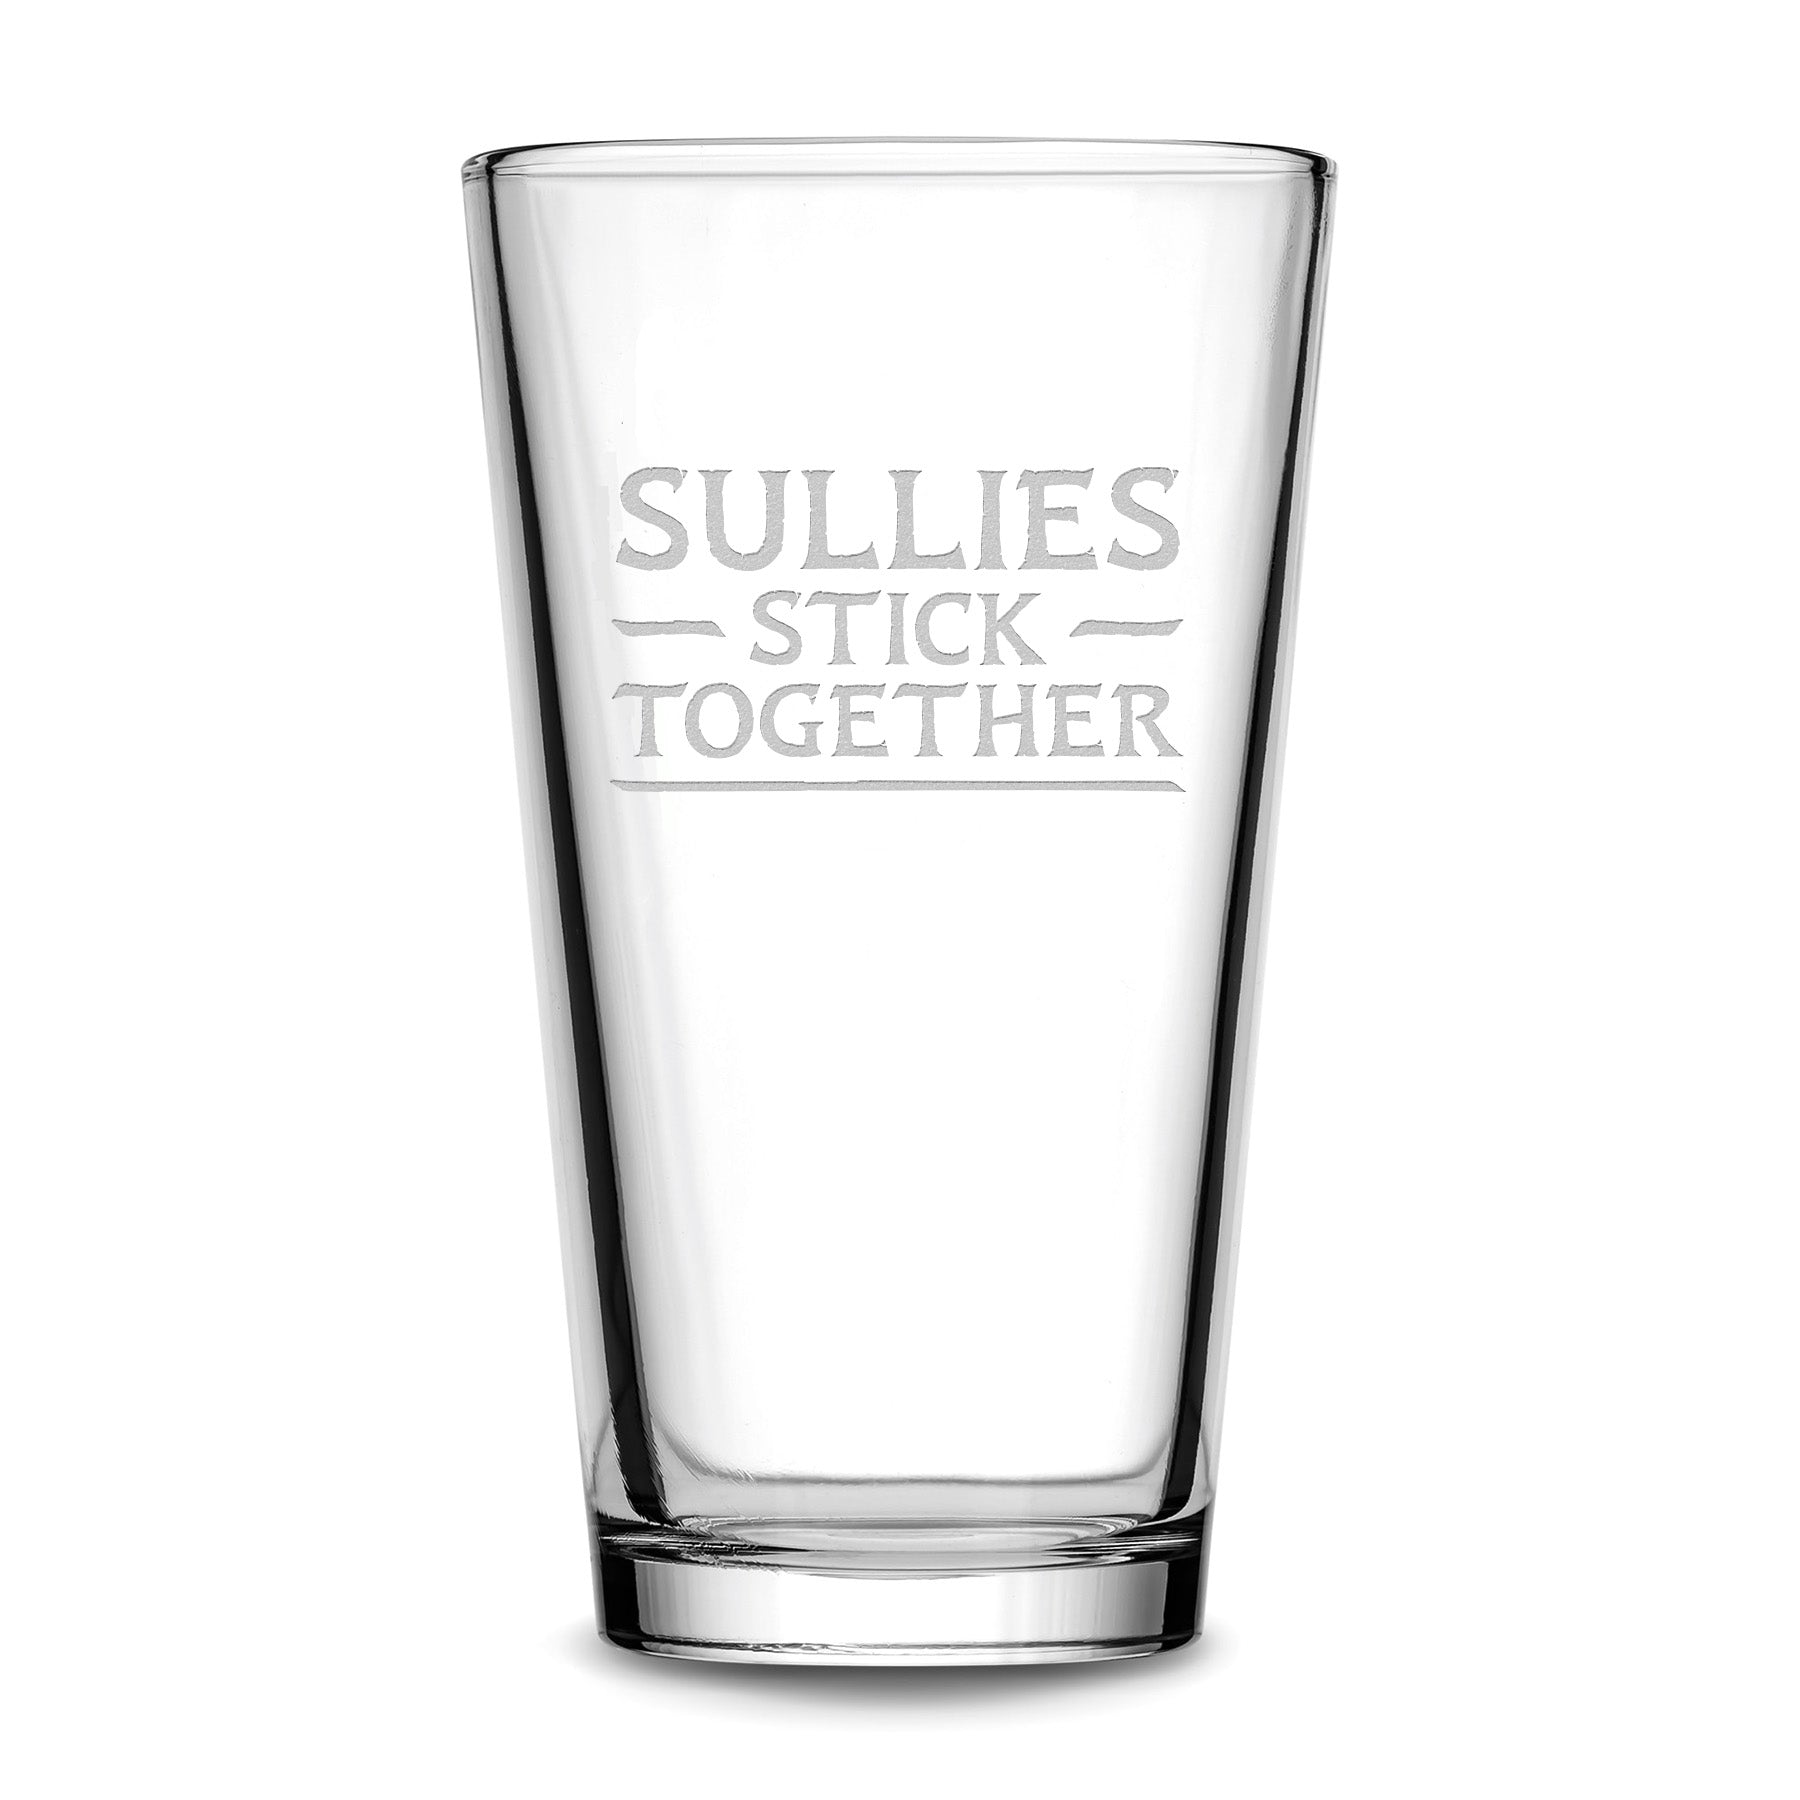 Premium Pint Glass, Avatar Sullies Stick Together, 16oz, Laser Etched or Hand Etched